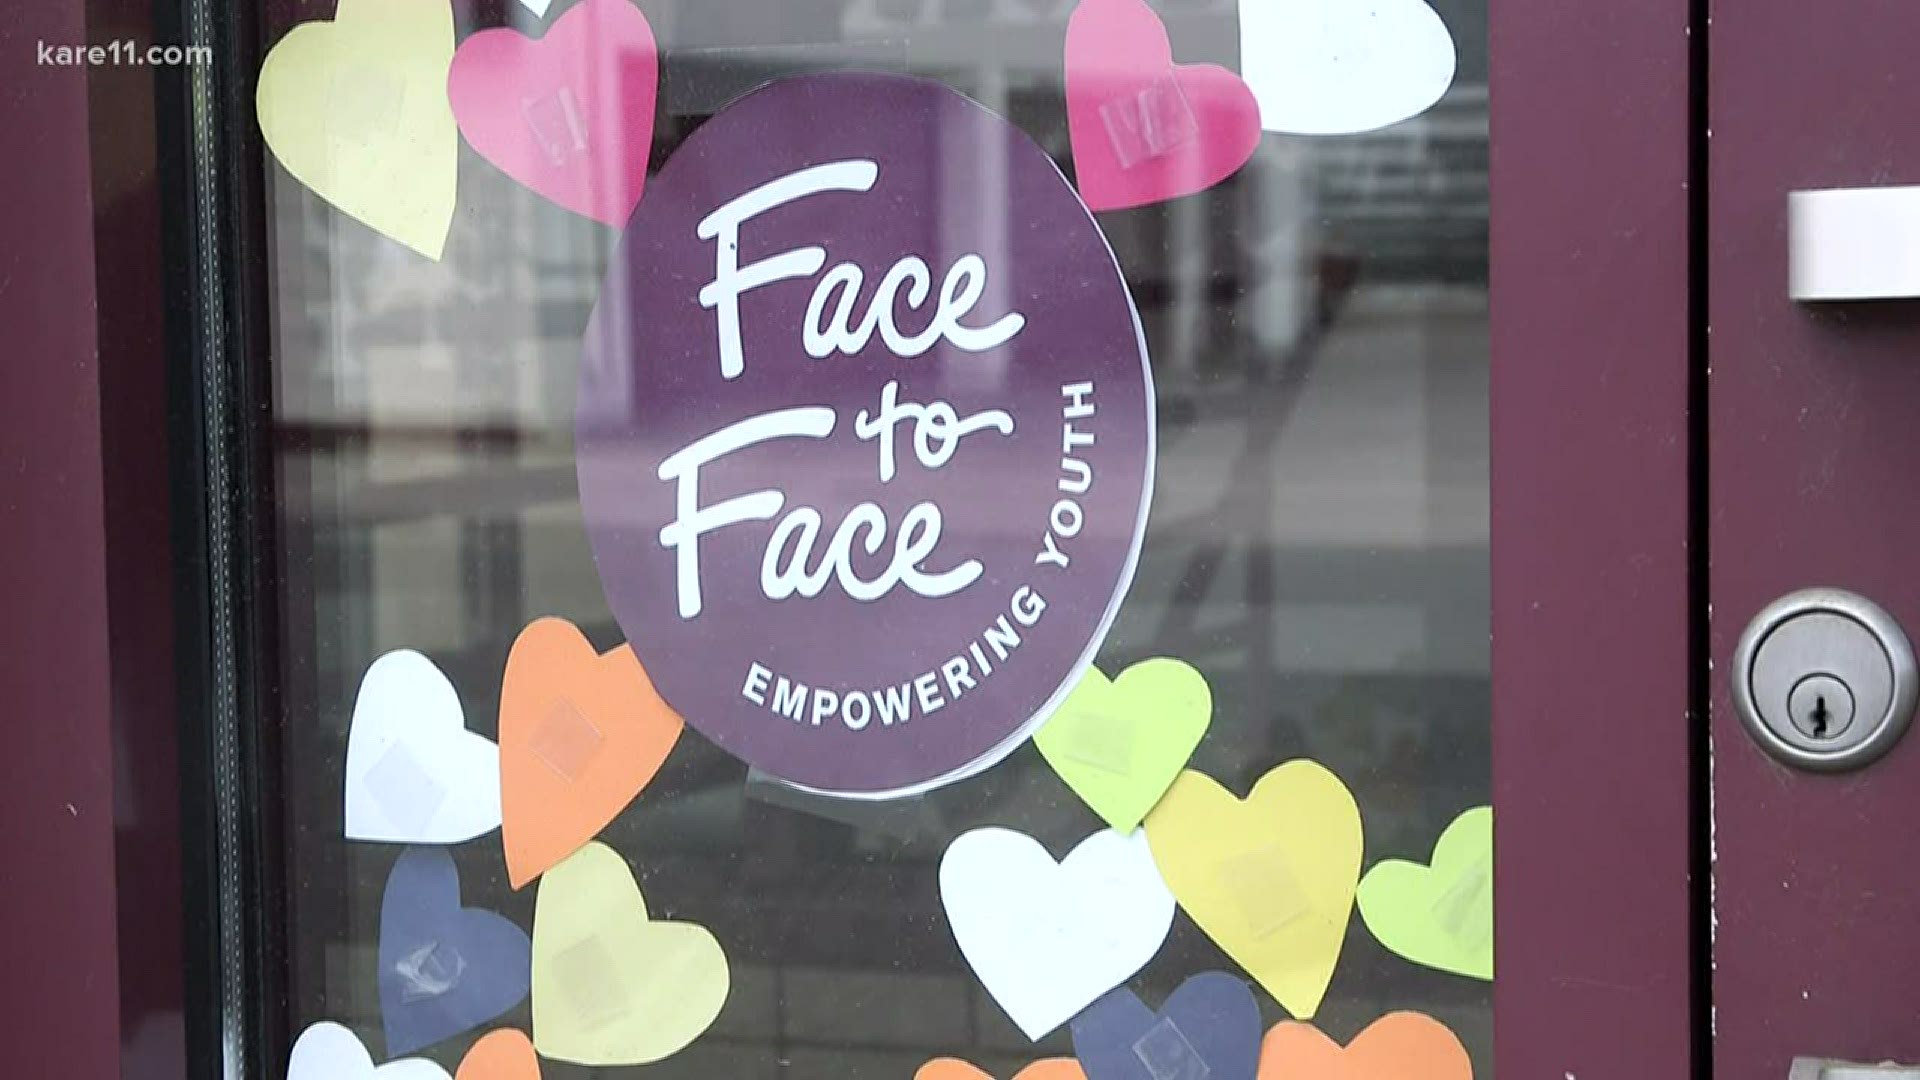 Face to Face has always helped the homeless youth population with housing and other necessities.